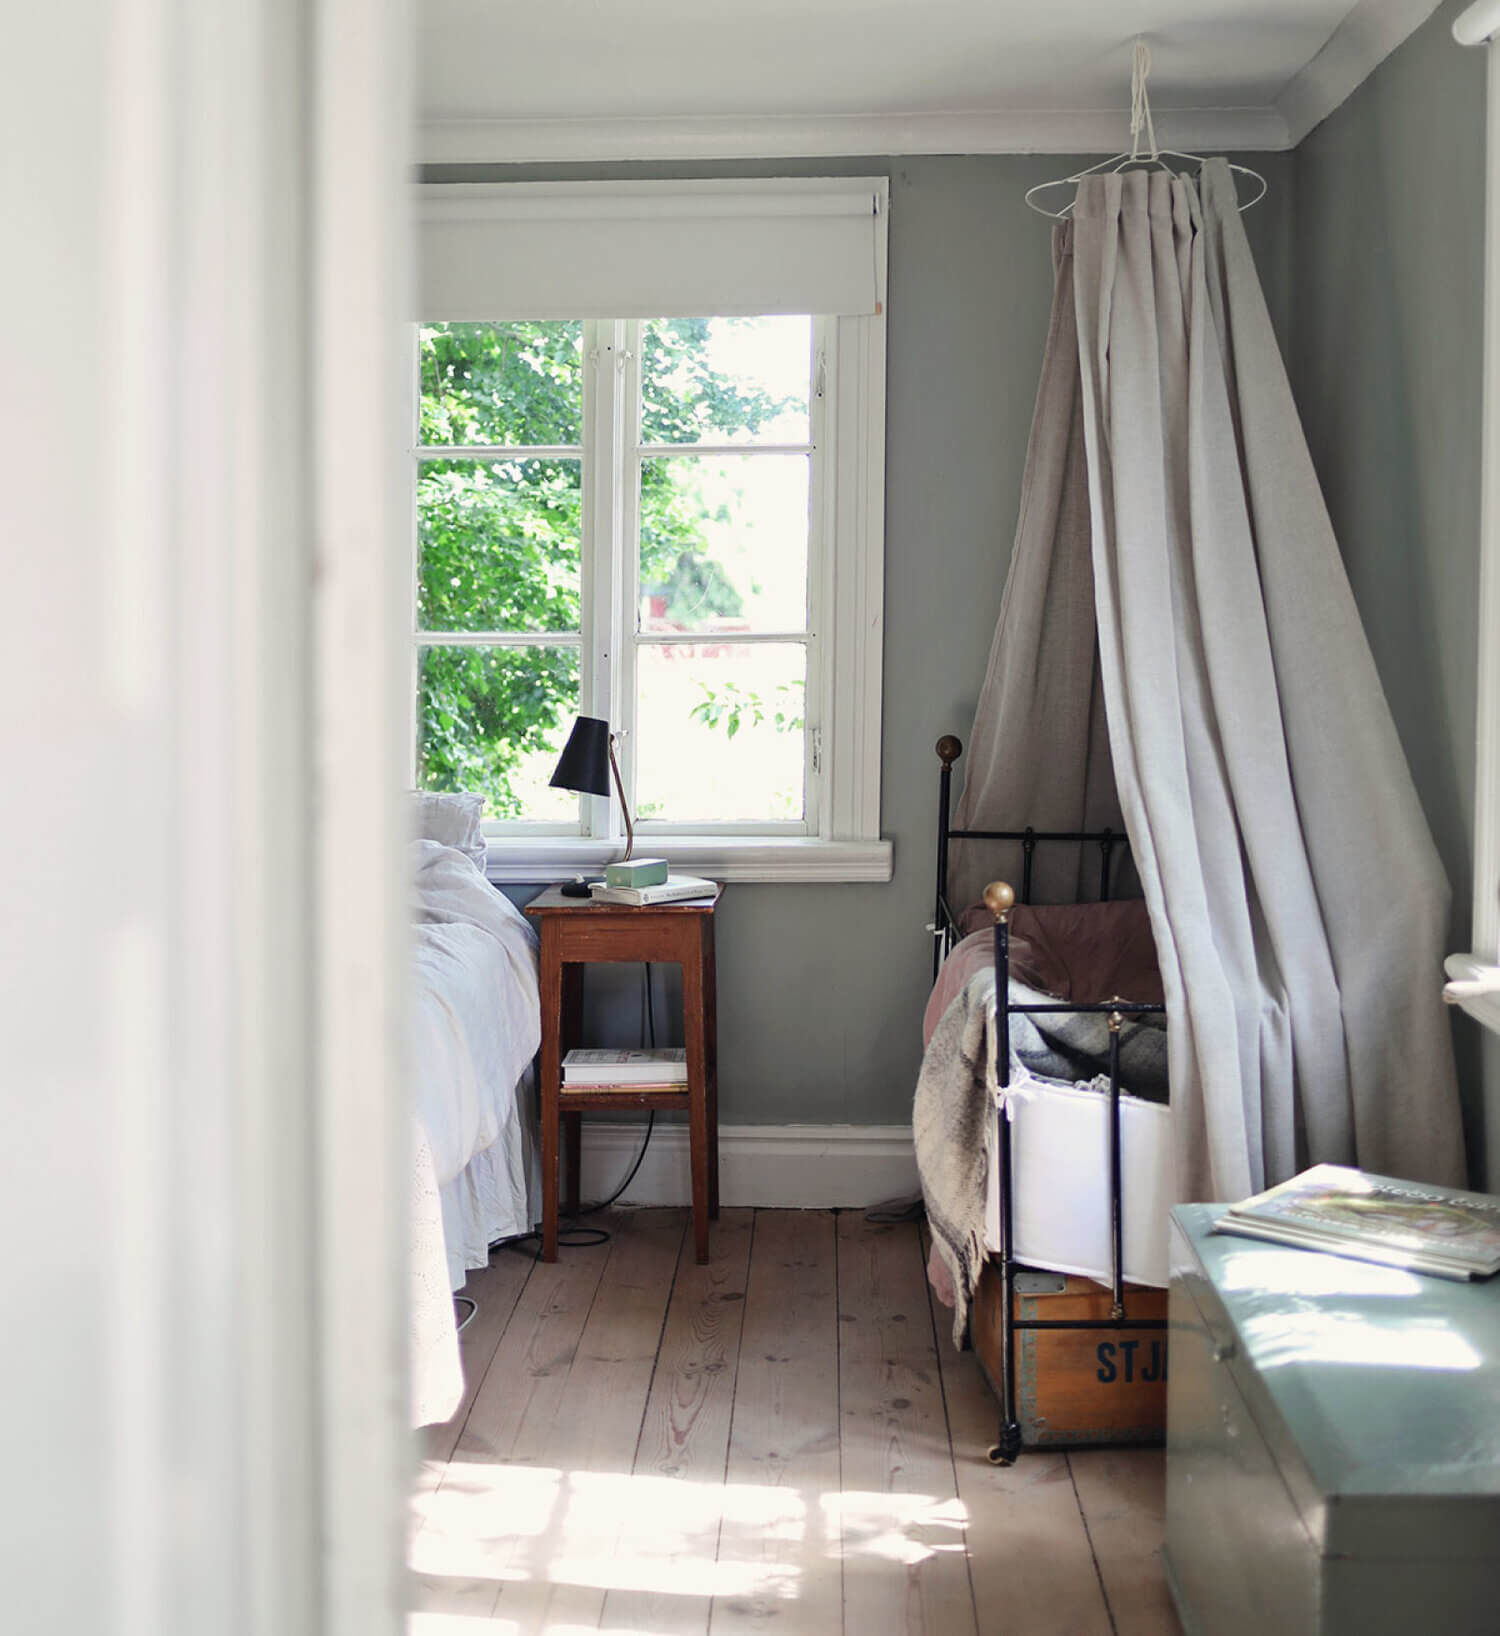 ASwedishCountryhousewithaDreamlikeGarden TheNordroom6 A Swedish Country House with a Dreamlike Garden